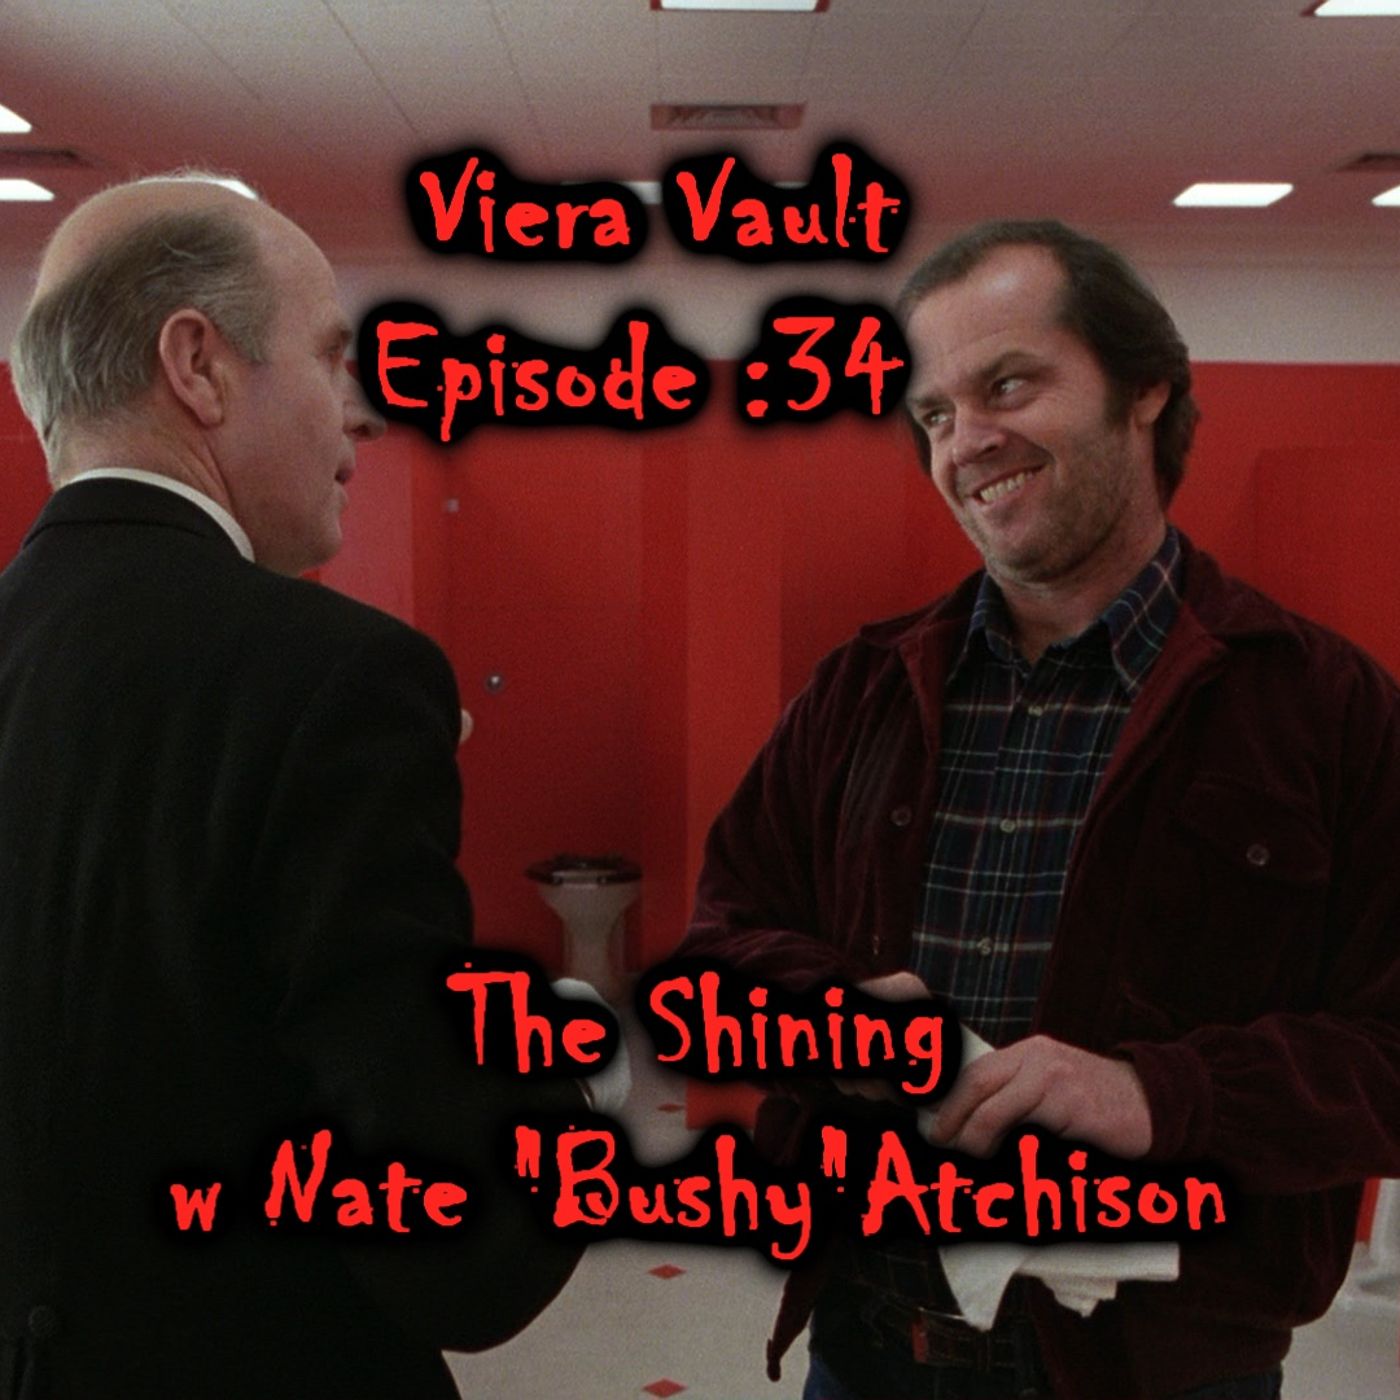 Episode 34: The Shining w Nate 